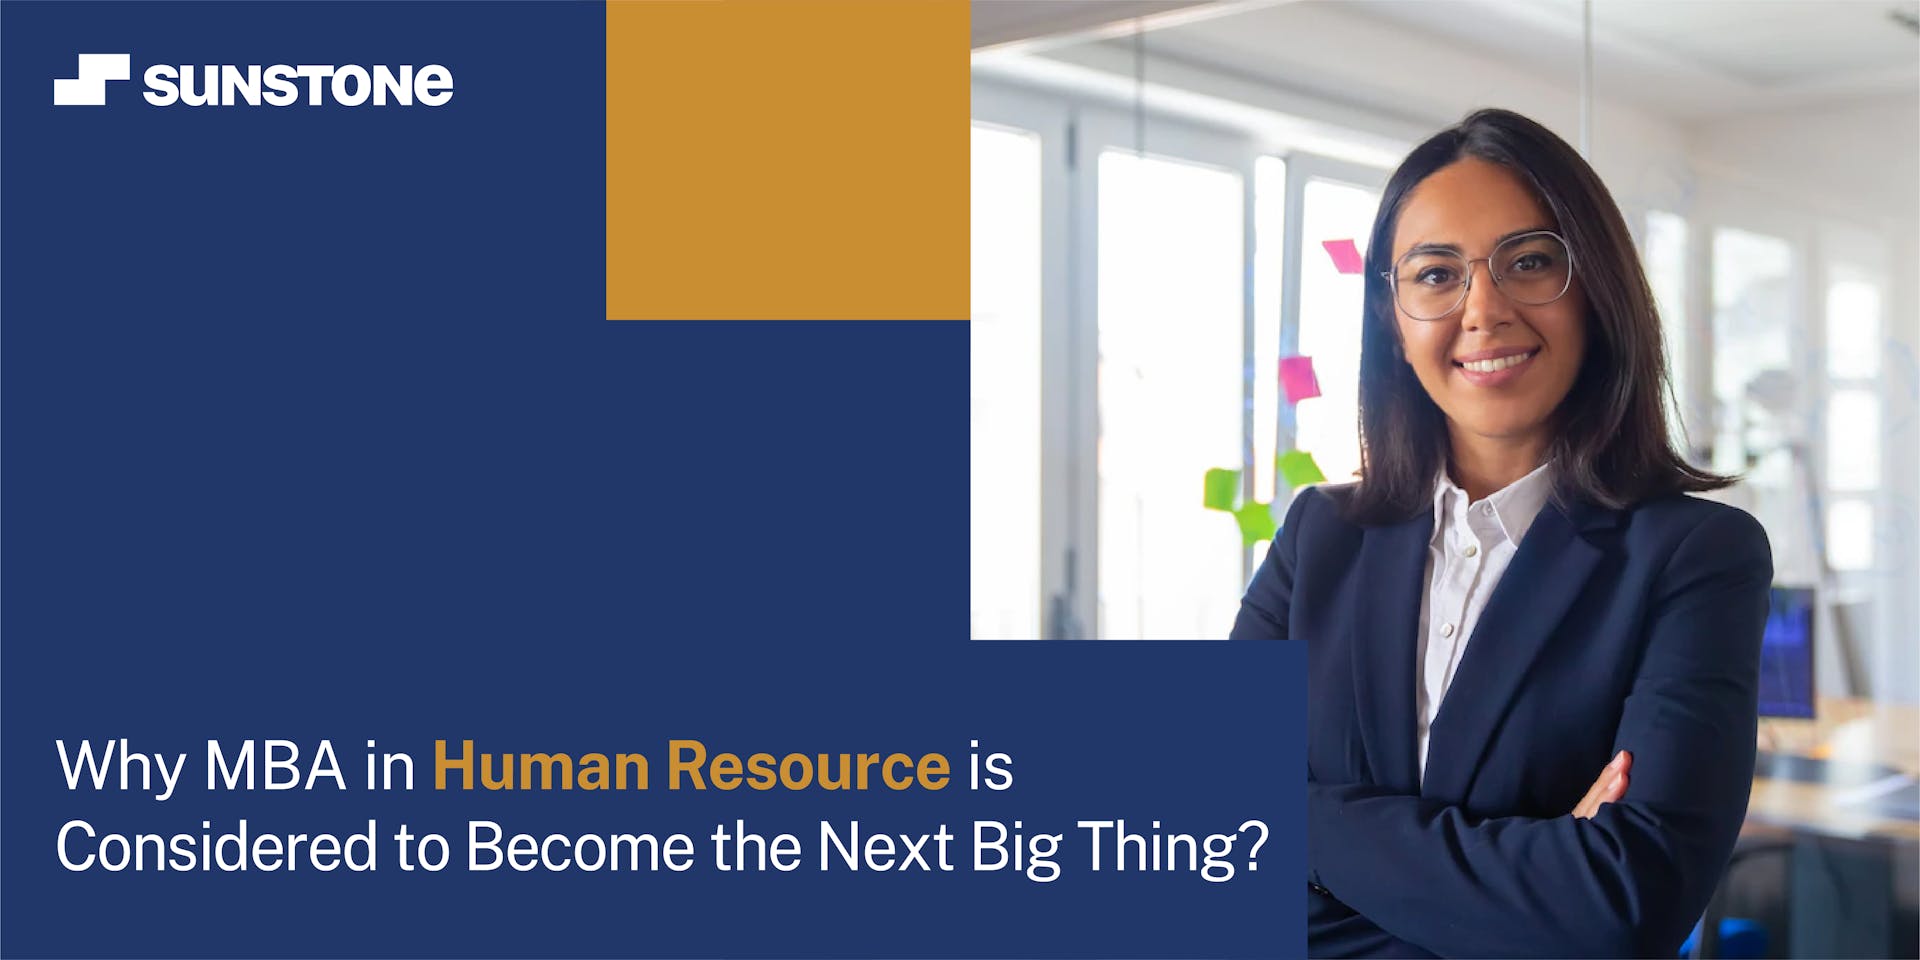 Why MBA in Human Resource is Considered to Become the Next Big Thing?